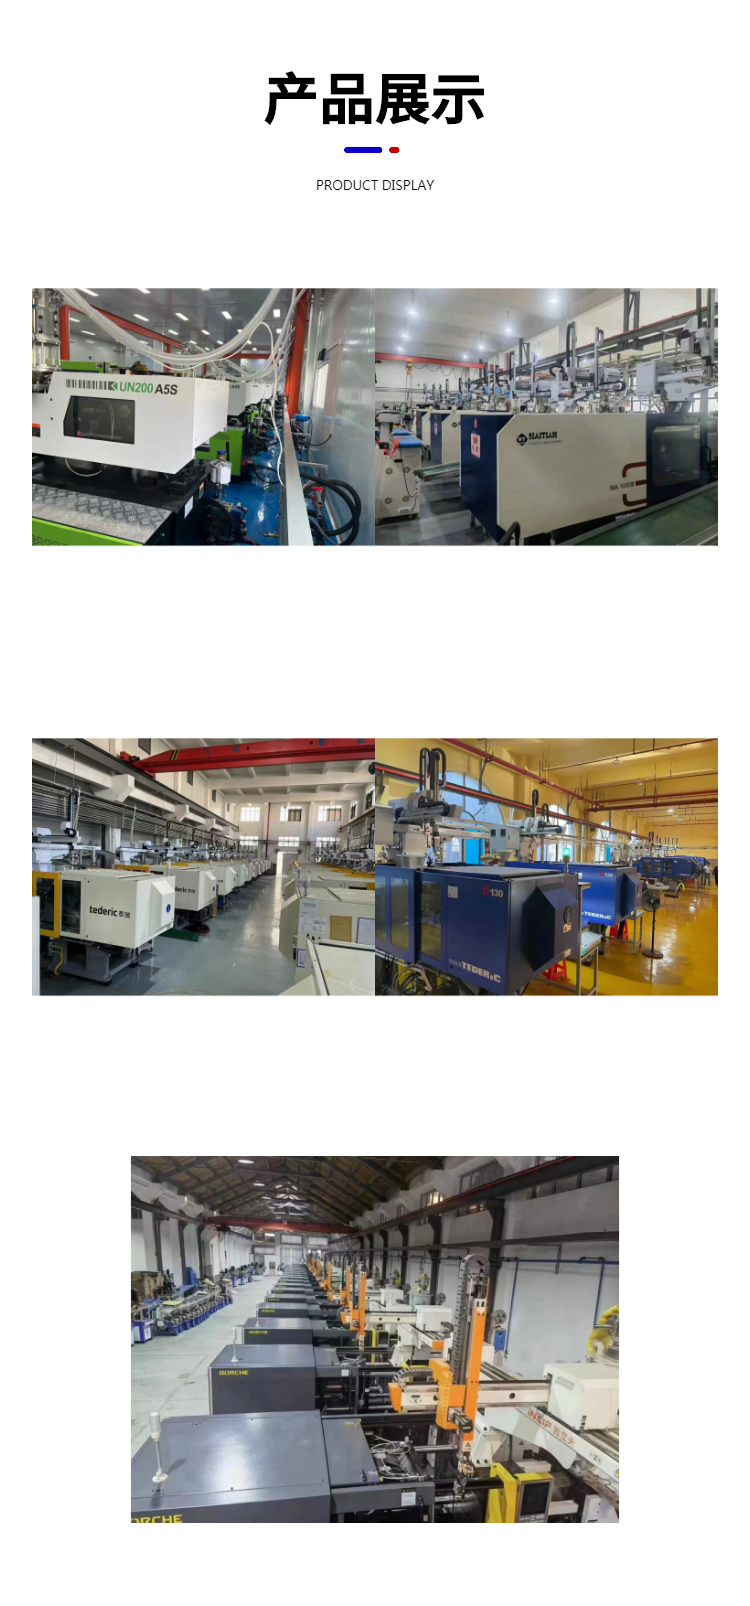 Used Fuqiangxin 470 ton servo injection molding machine, easy to use and worry free, with a lower mold weight of 820 and a glue weight of 1900 grams